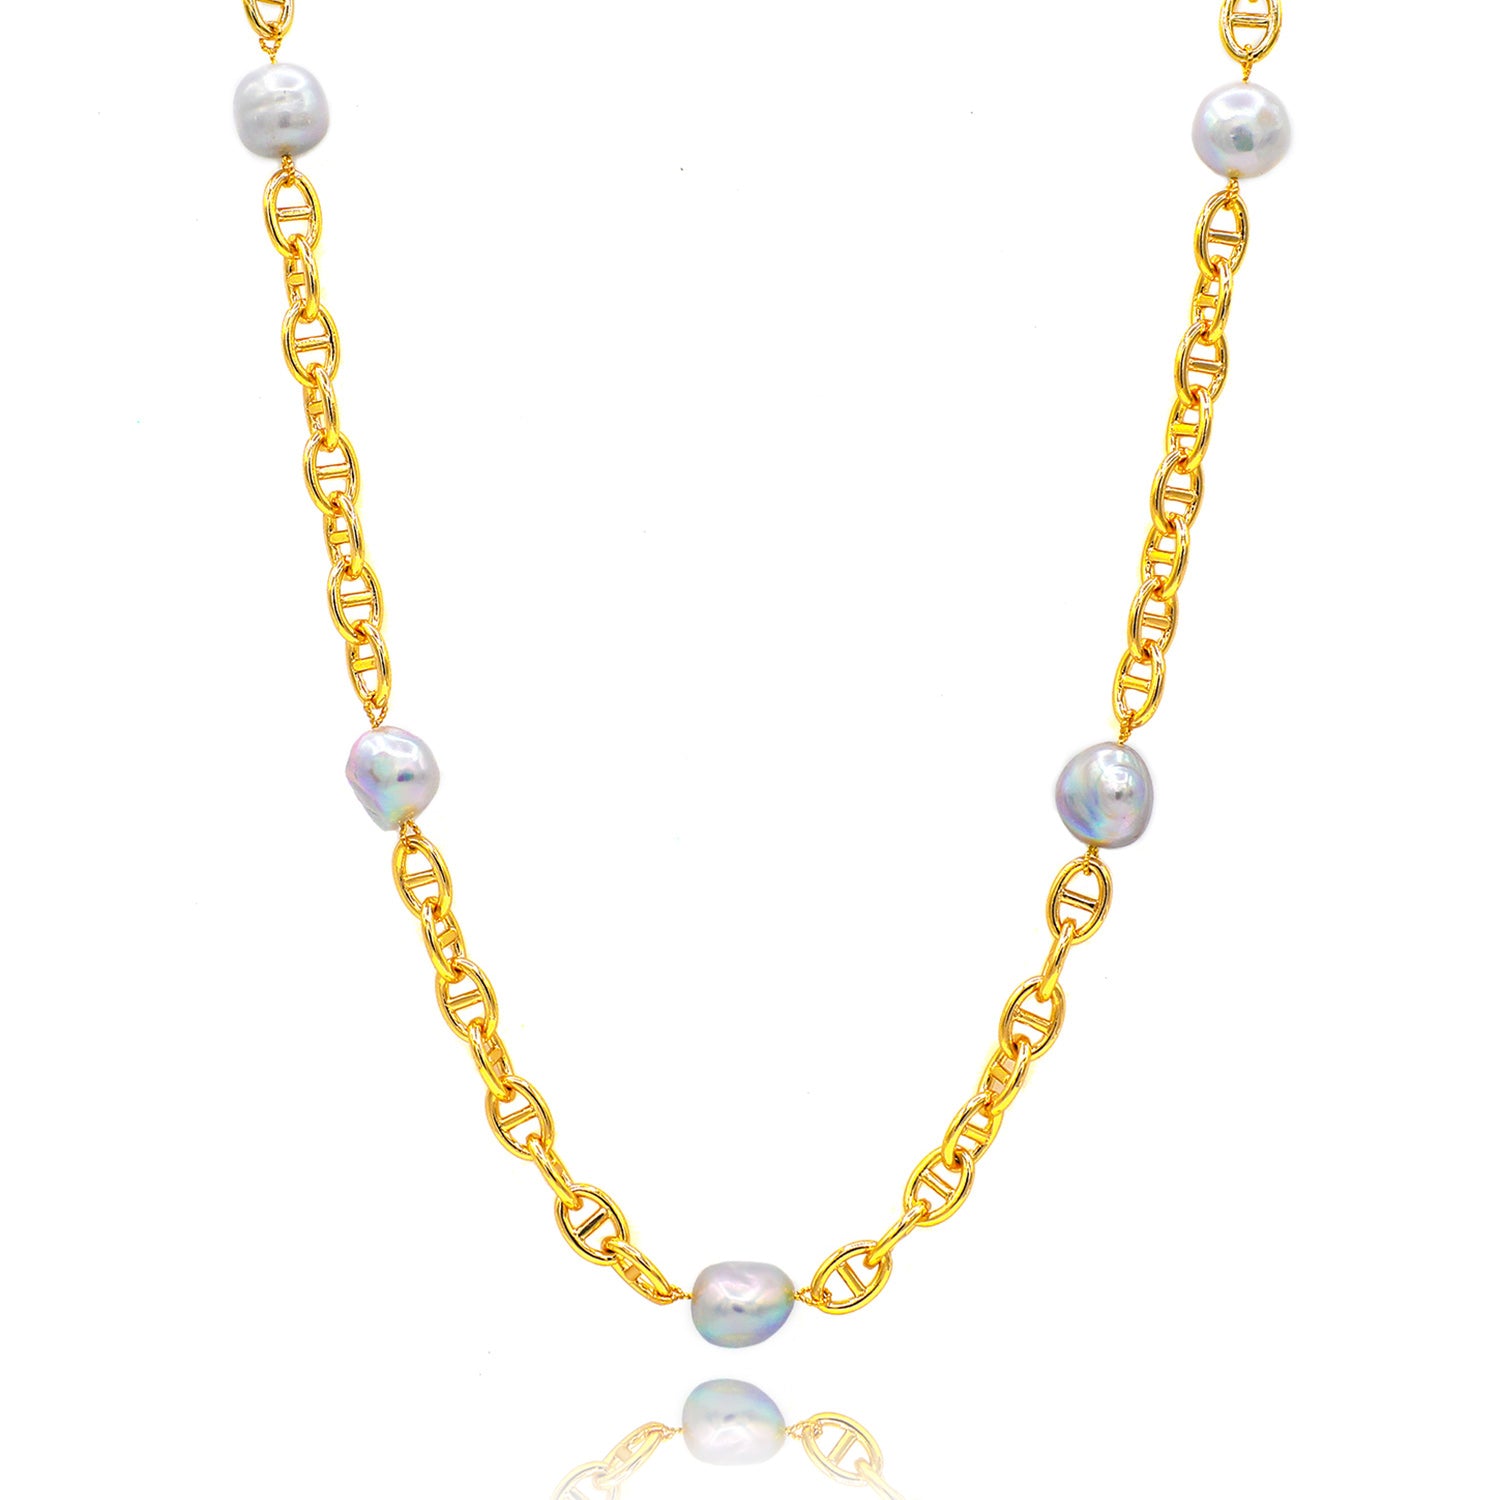 The Hope Pearl Necklace